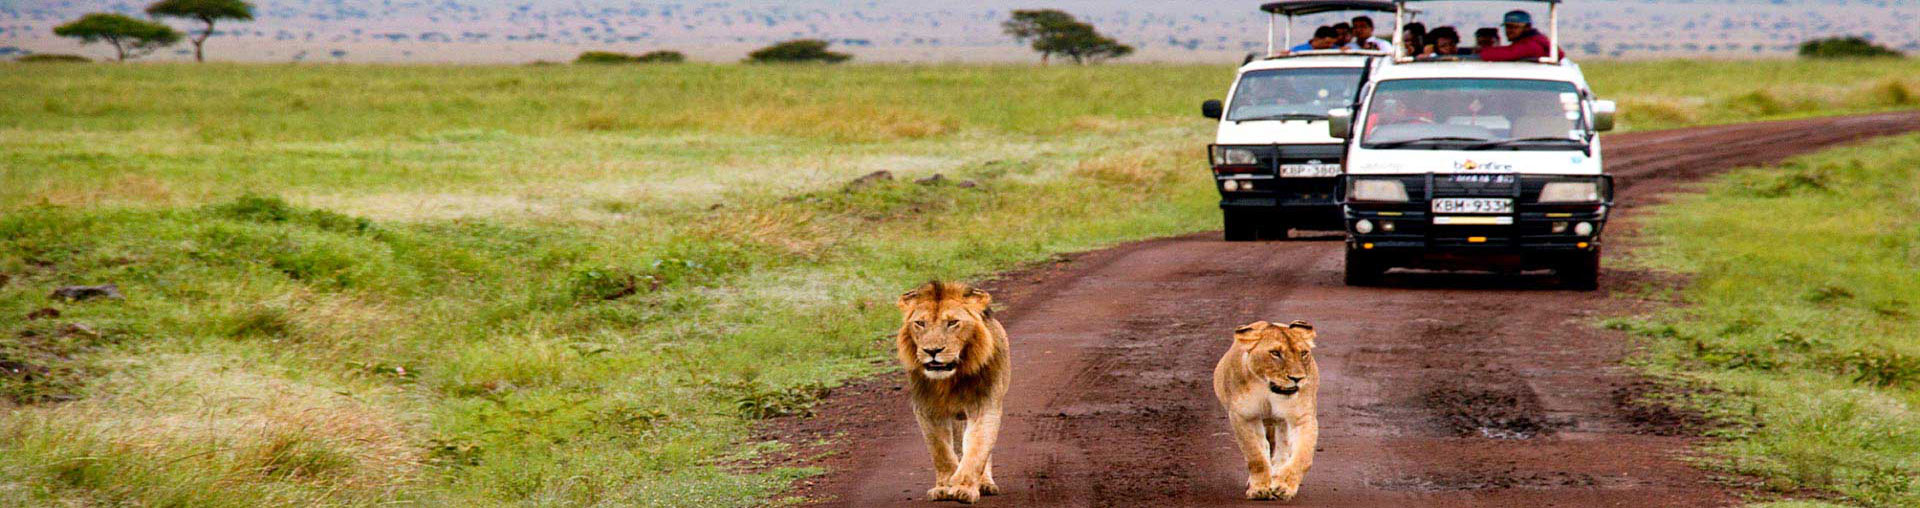 Kenya Tour Package from India